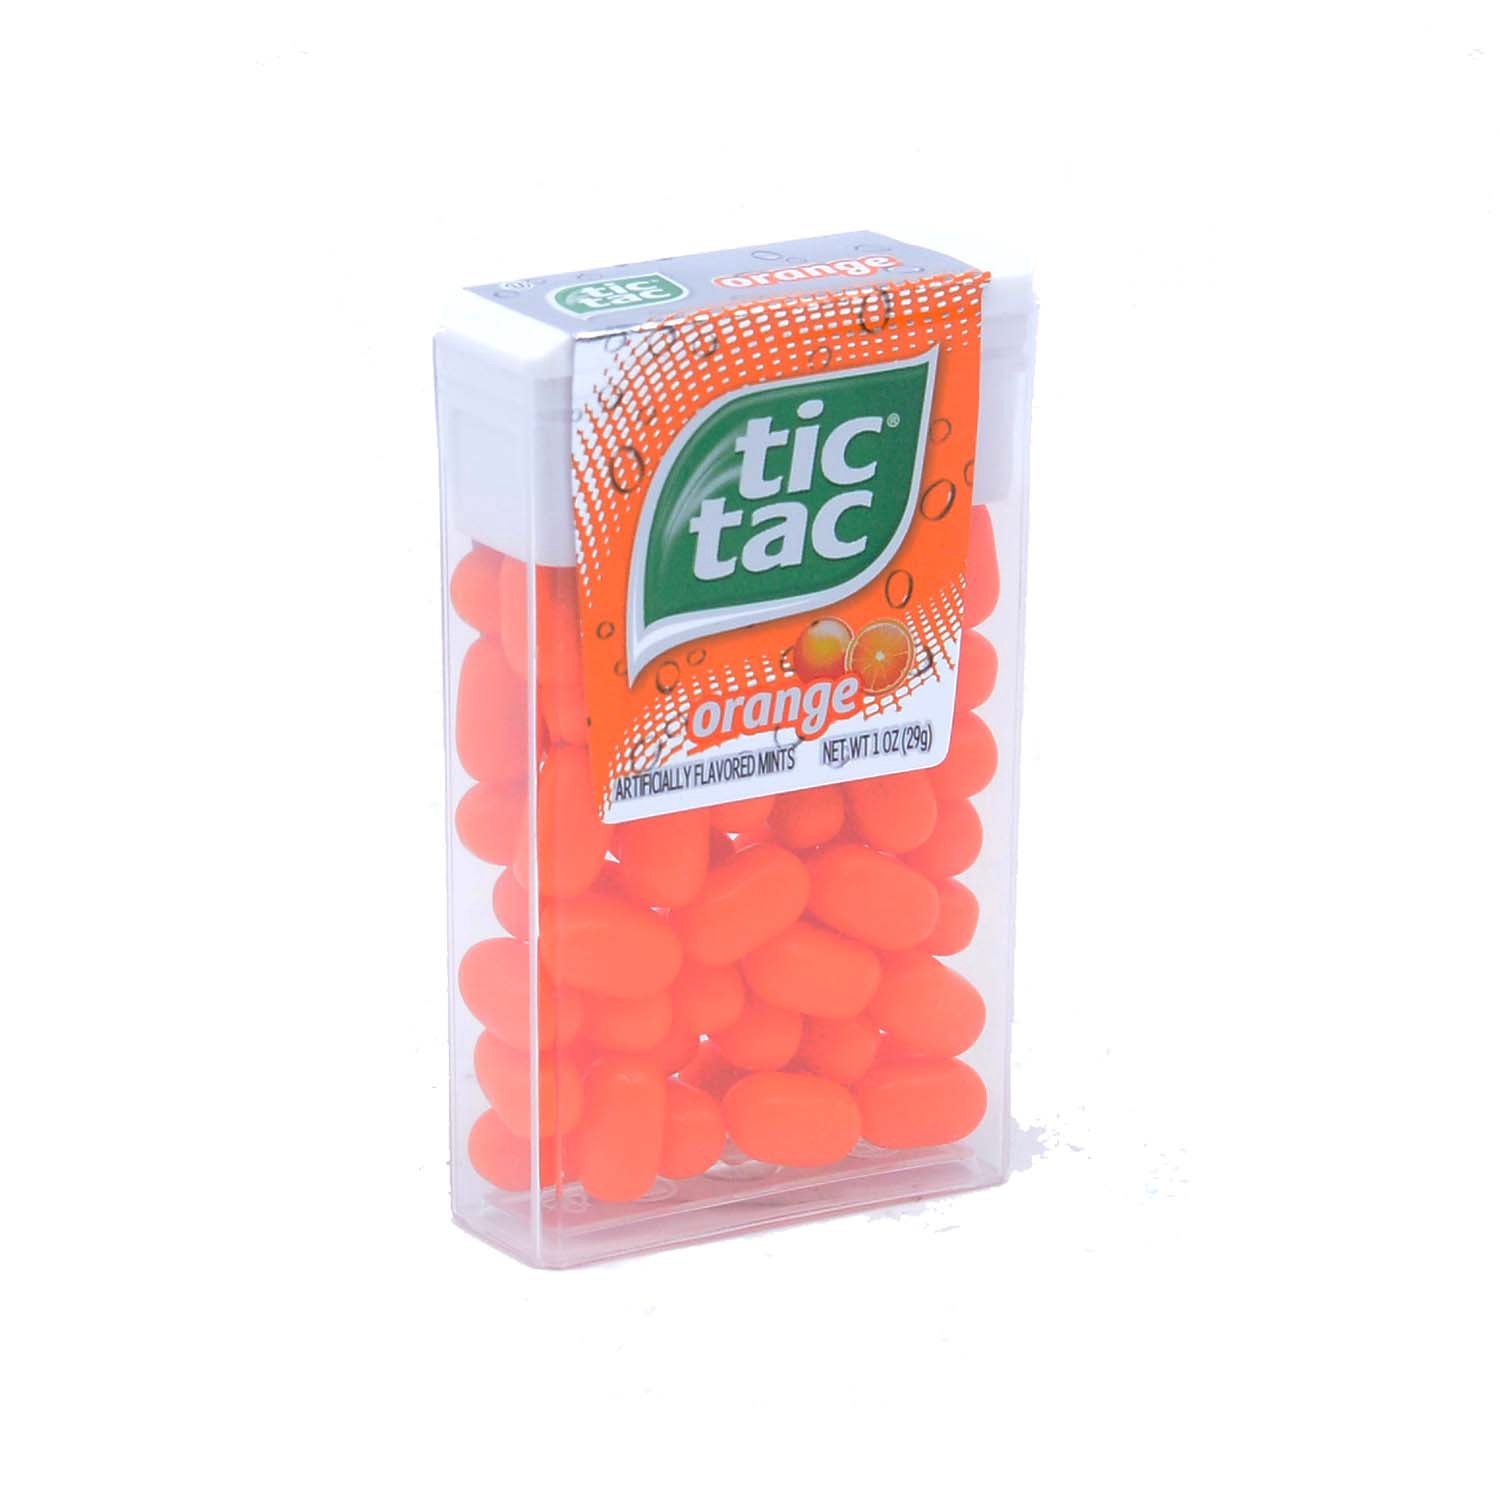 Tic Tac Orange Flavored Mints, On-The-Go Refreshment, Easter Basket  Stuffers, 1 oz, Single Pack 